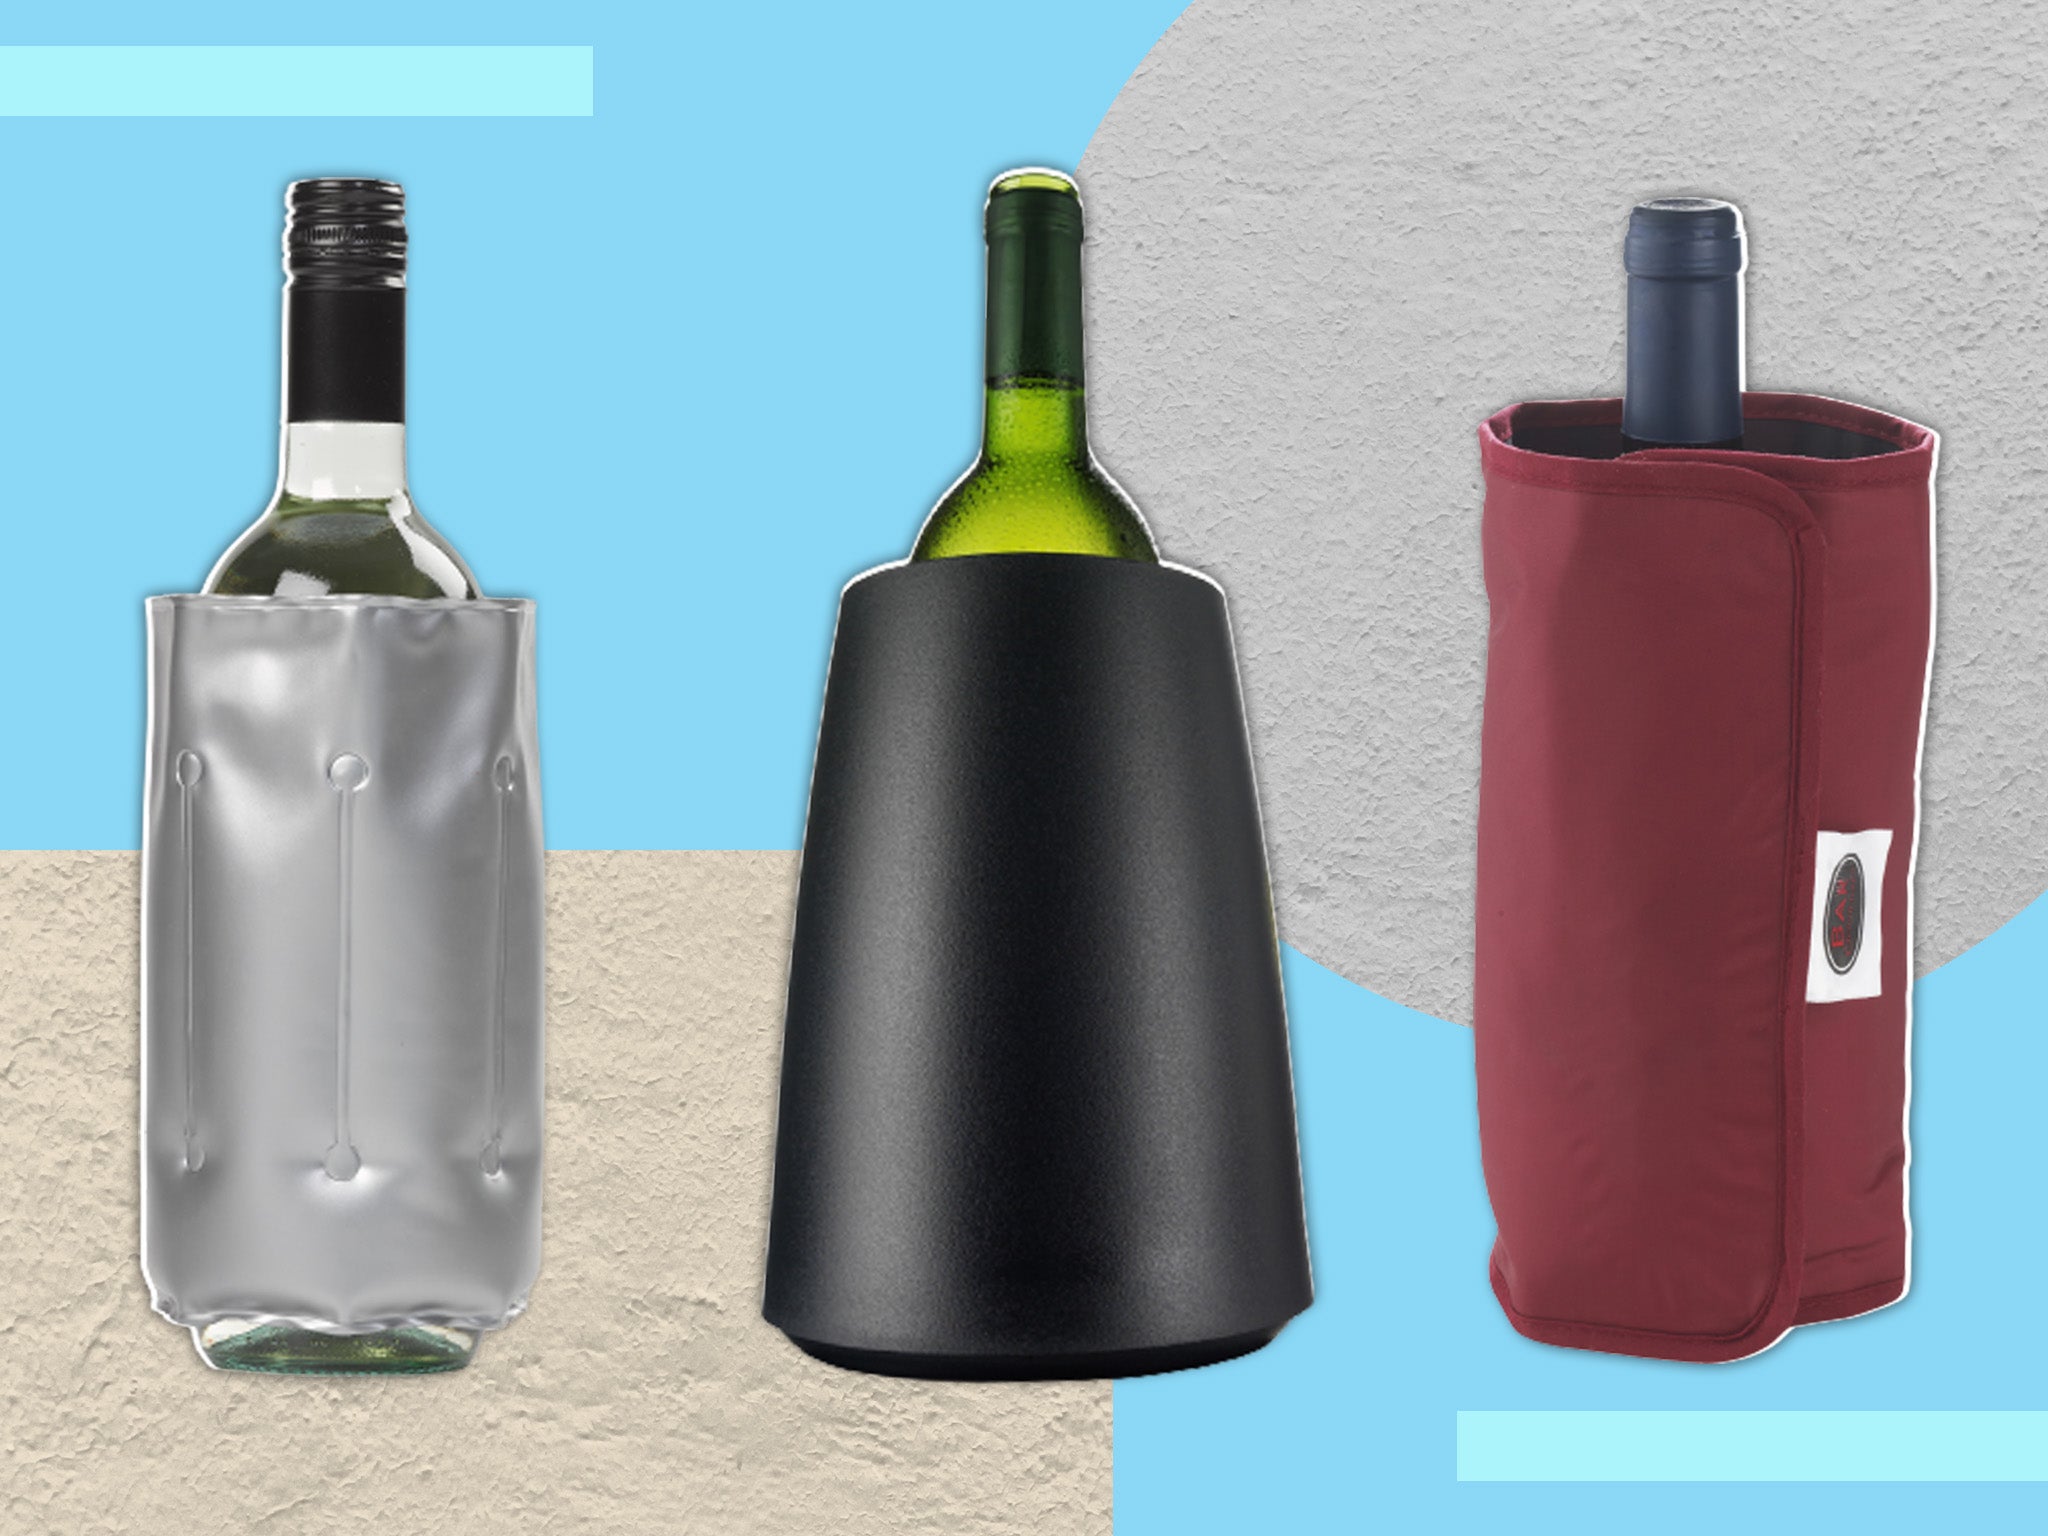 The Chiller: Wine Chiller and Ice Bucket Cold Beer and Chilled Beverages Ice Bag Carrier with Handles for White Wine Champagne